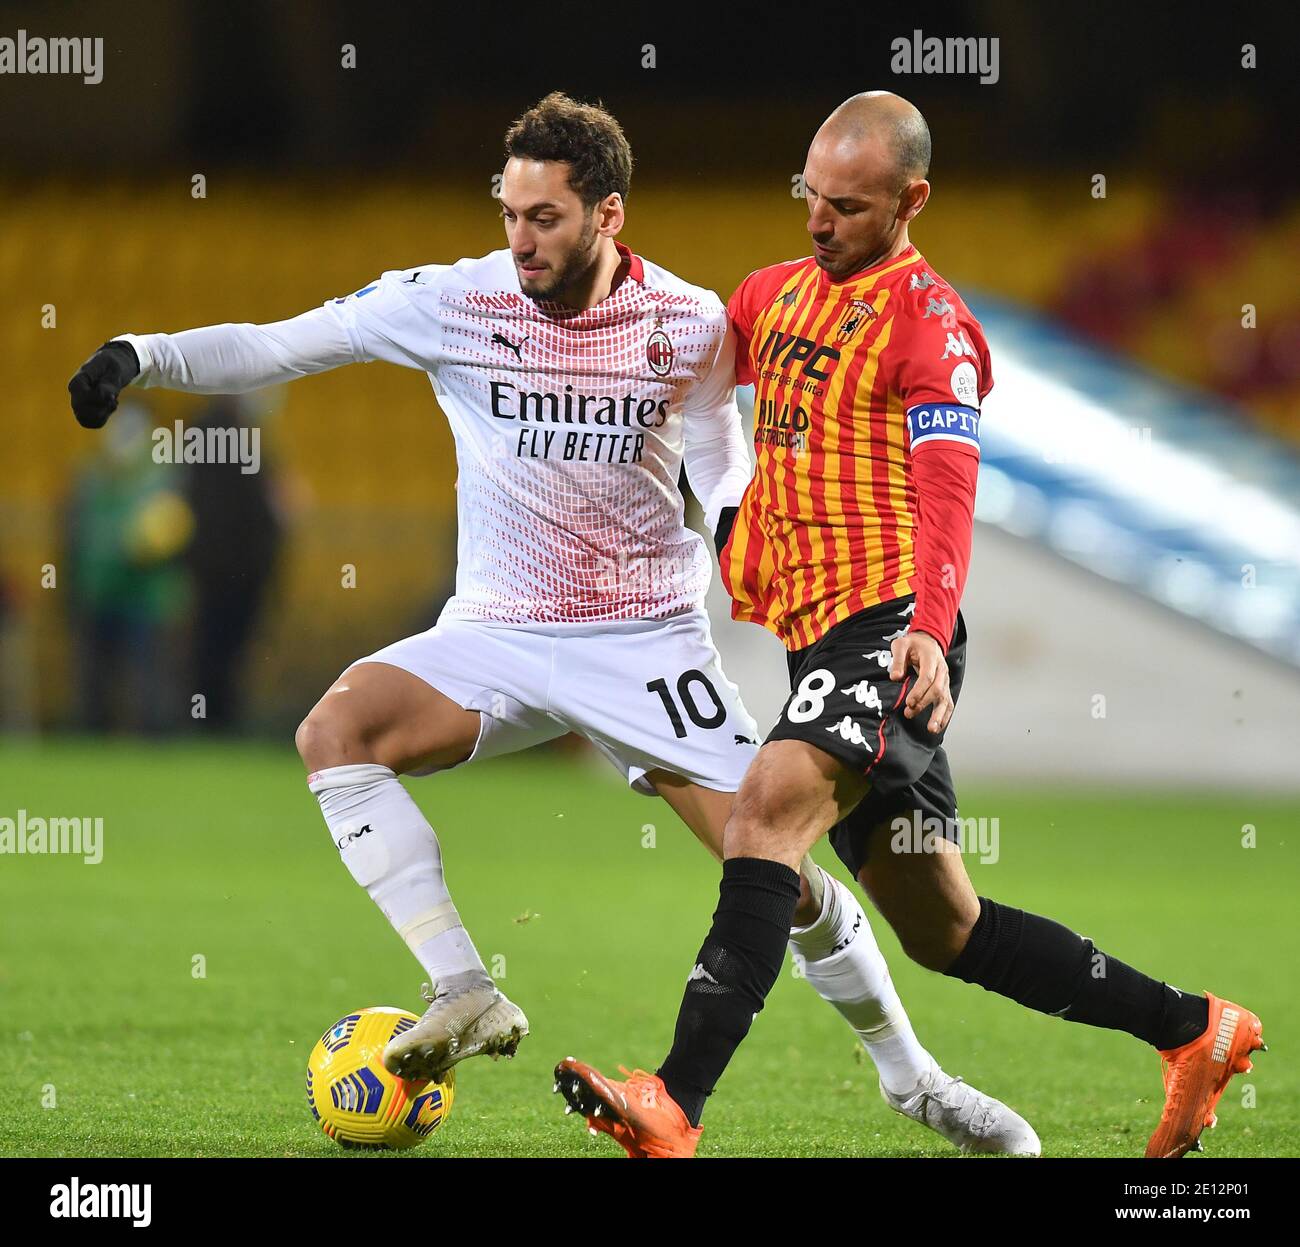 Benevento, Italy. 3rd Jan, 2021. AC Milan's Hakan Calhanoglu (L) vies with Benevento's Pasquale Schiattarella during a Serie A match between Benevento and AC Milan in Benevento, Italy, Jan. 3, 2021. Credit: Daniele Mascolo/Xinhua/Alamy Live News Stock Photo